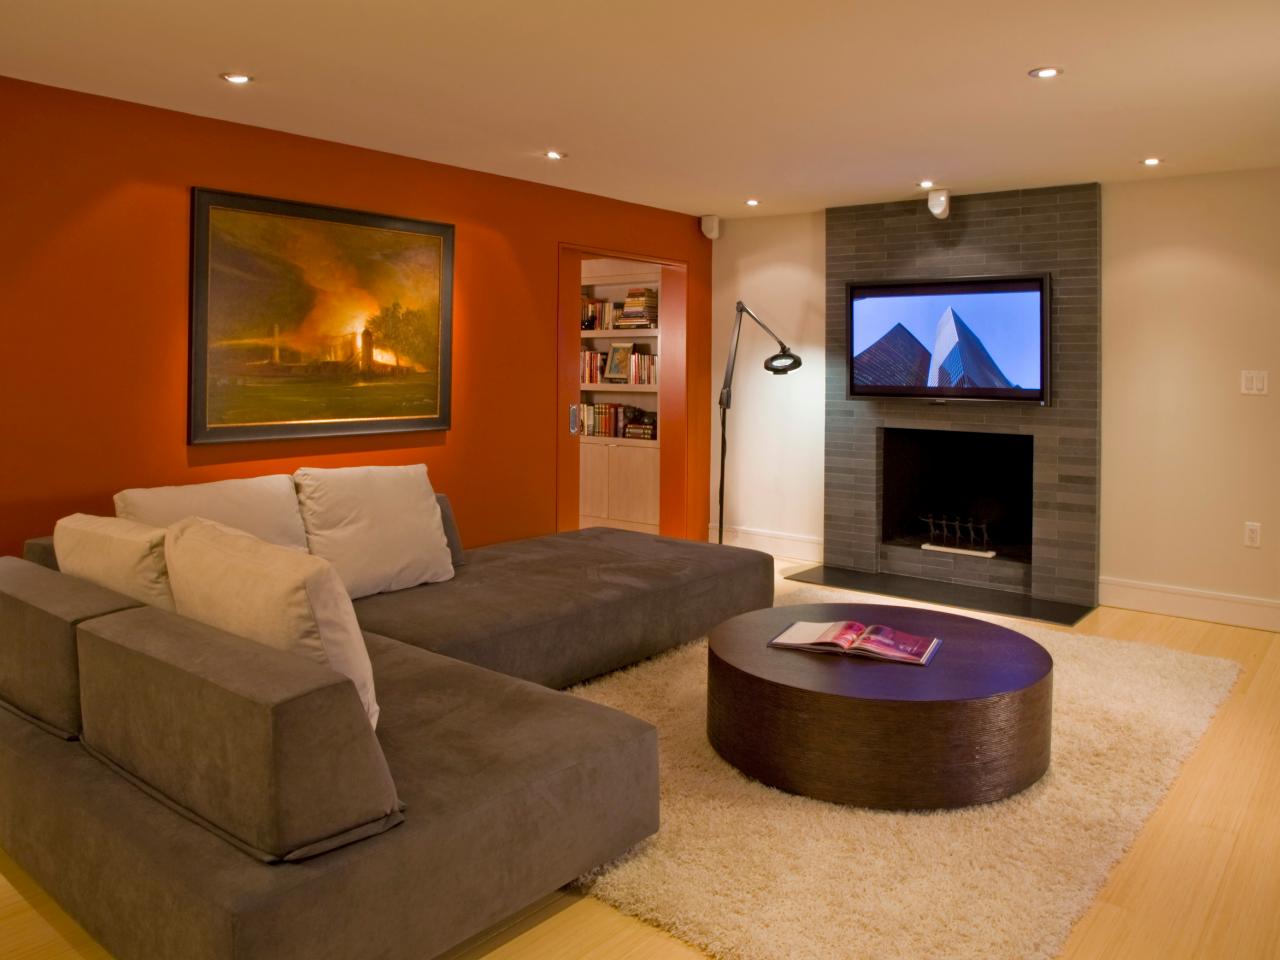 Basement Flooring Options And Ideas Pictures Options Expert